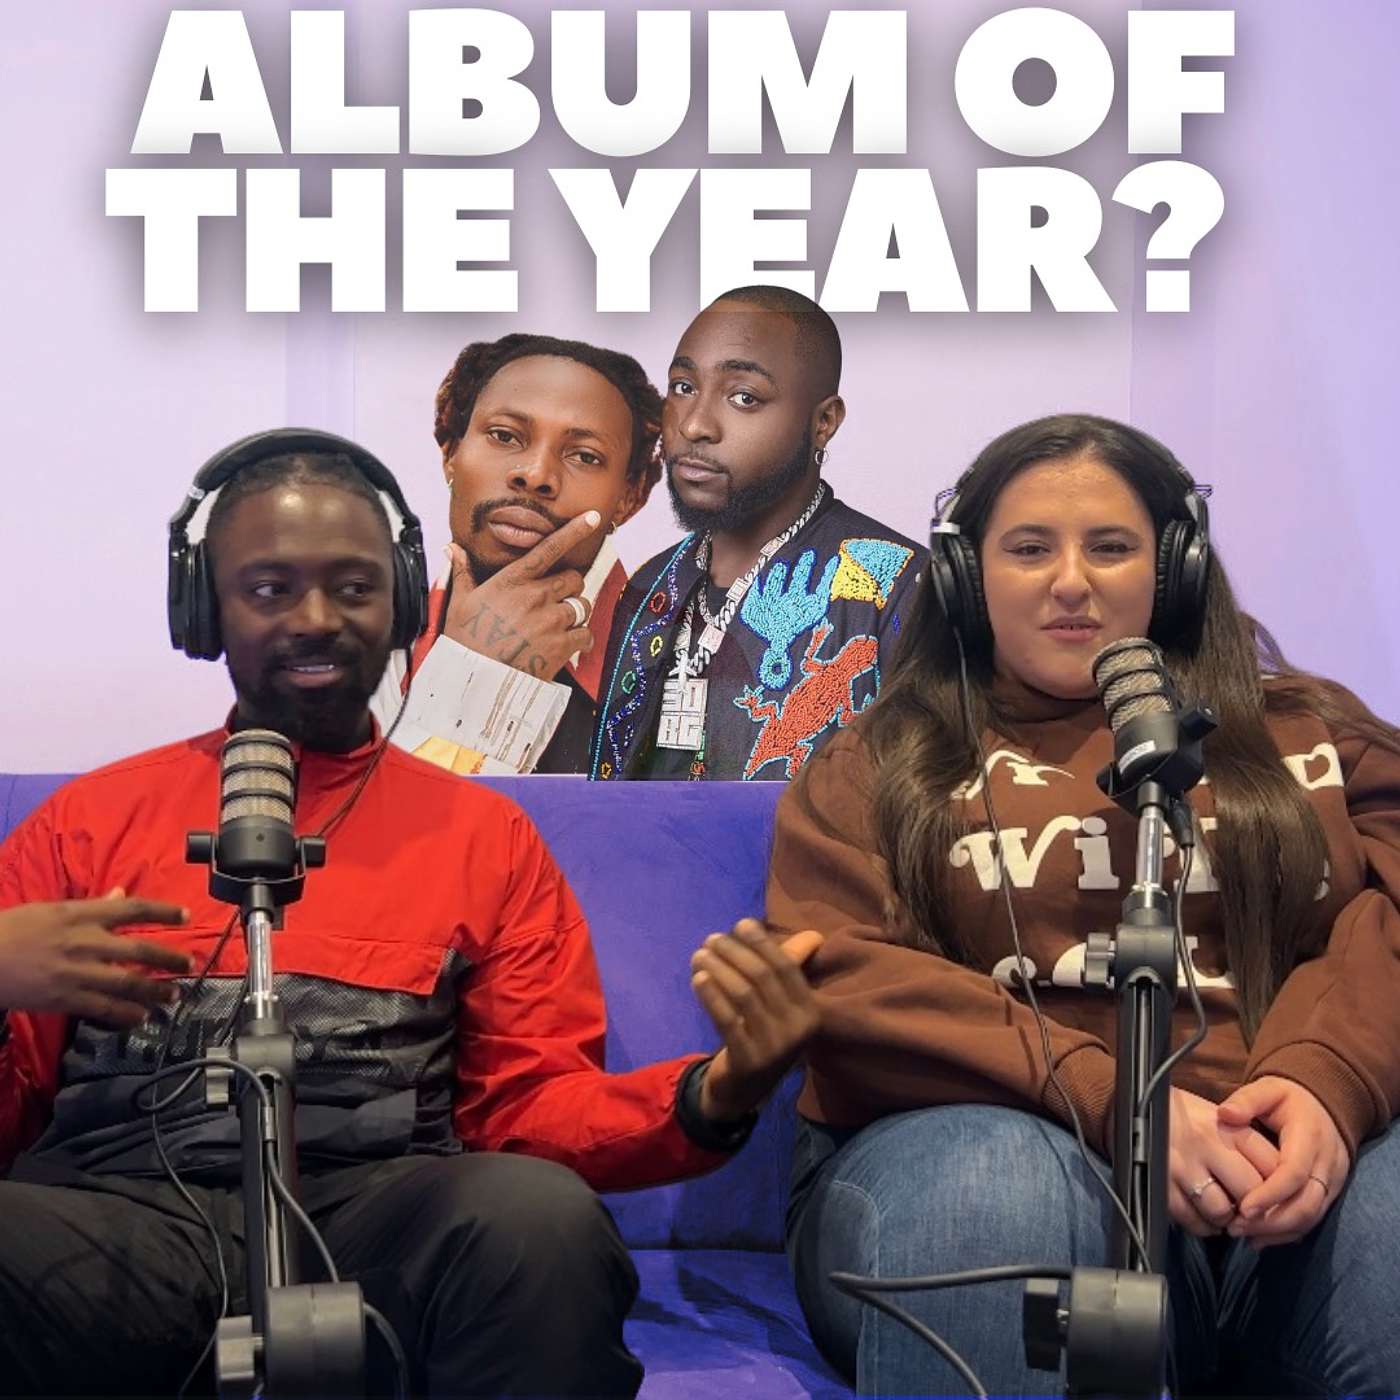 Who Has The Album Of The Year?